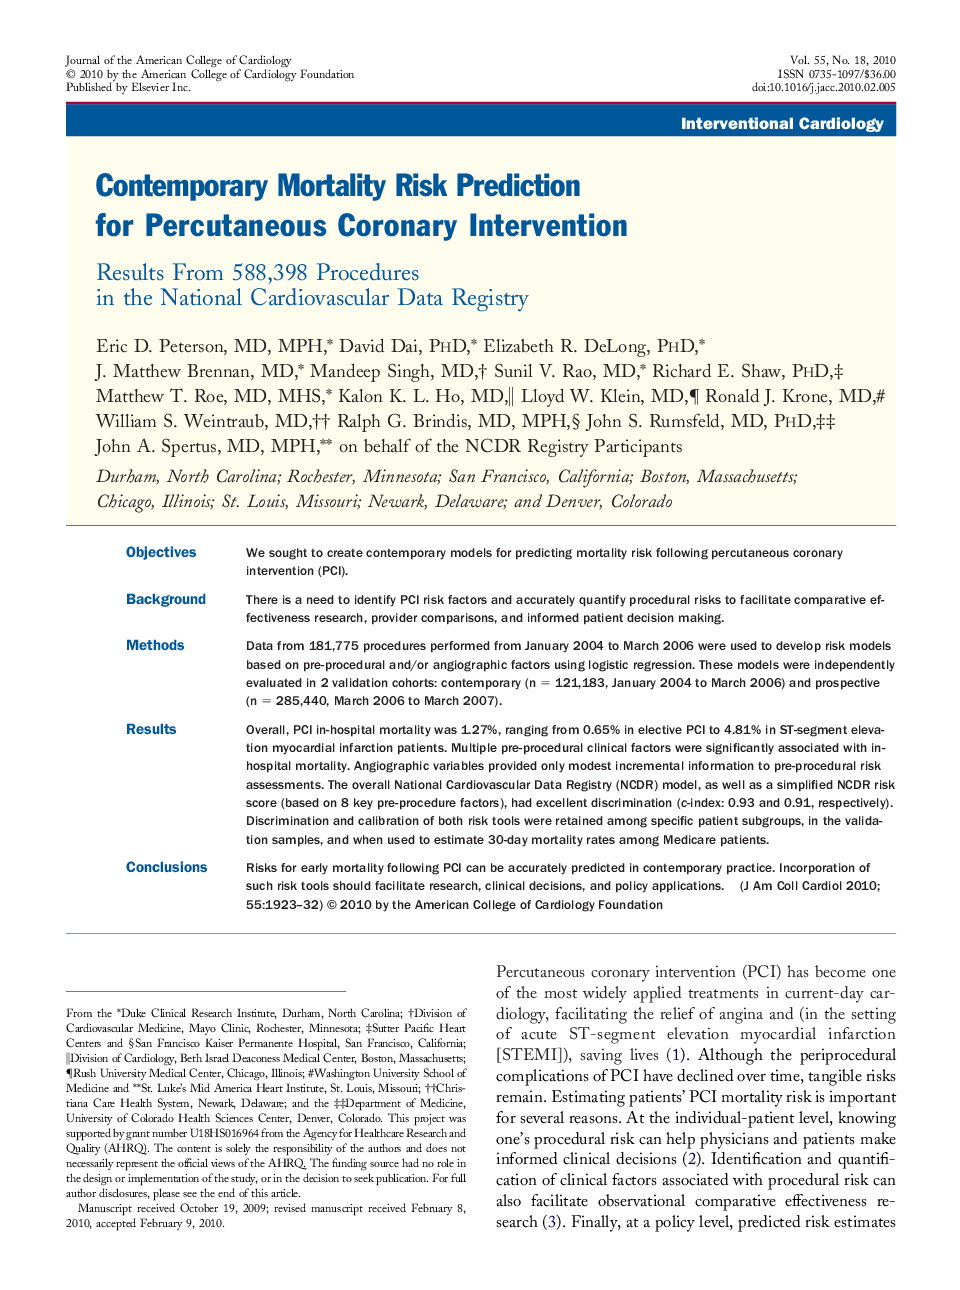 Contemporary Mortality Risk Prediction for Percutaneous Coronary Intervention : Results From 588,398 Procedures in the National Cardiovascular Data Registry